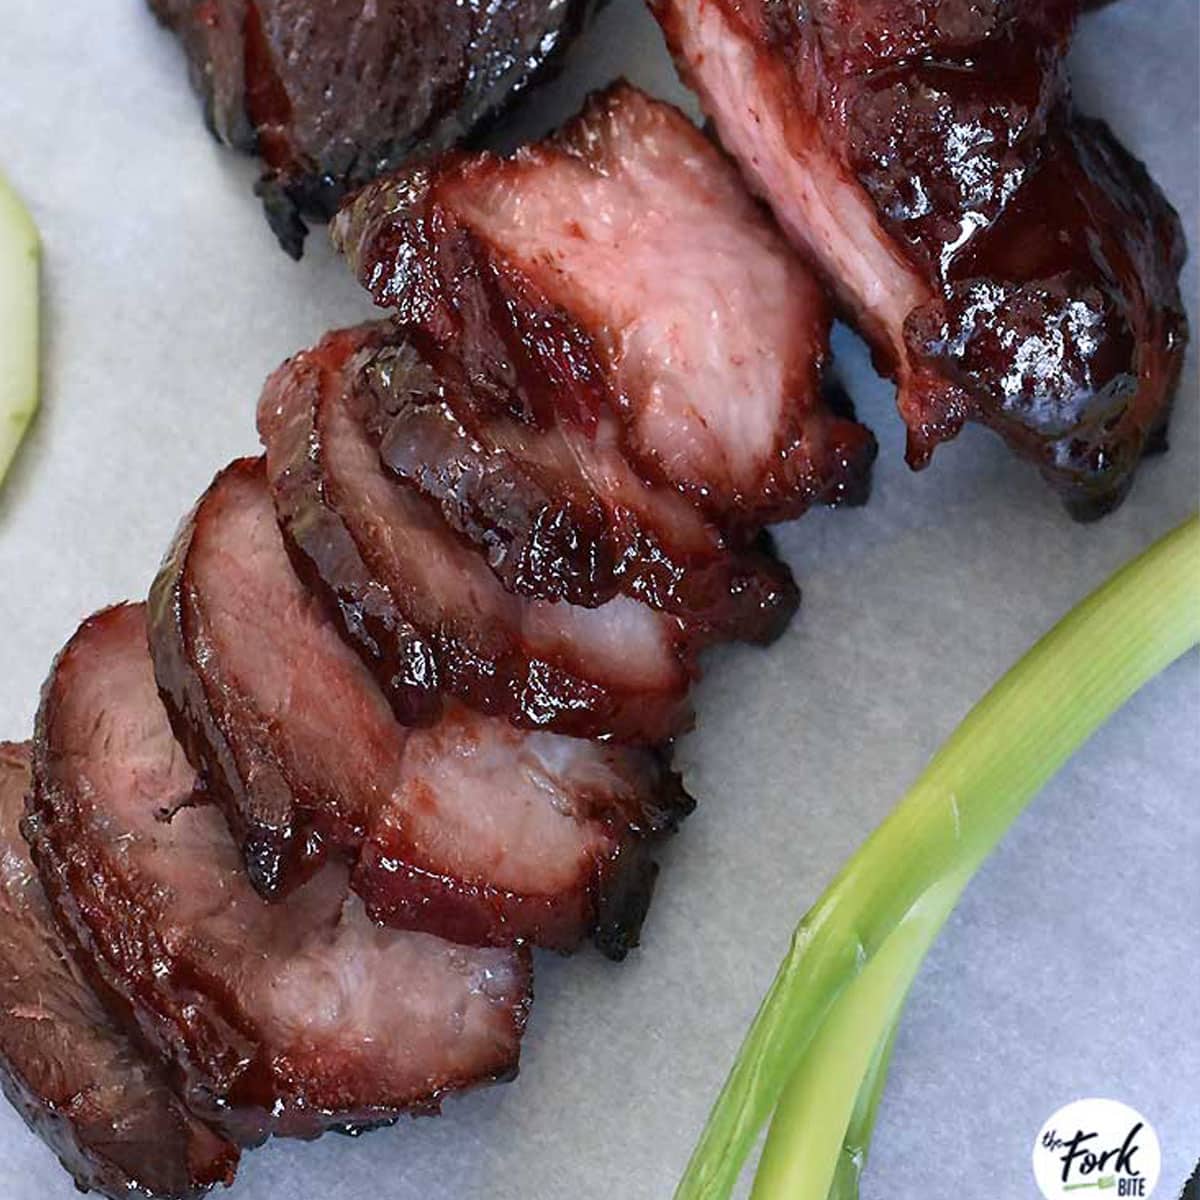 Get the perfect Char Siu every time with this easy and delicious sous vide recipe. Experience the juicy and flavorful pork with a crispy exterior and a mouth-watering glaze. Get ready to impress your guests with this authentic and delicious dish.